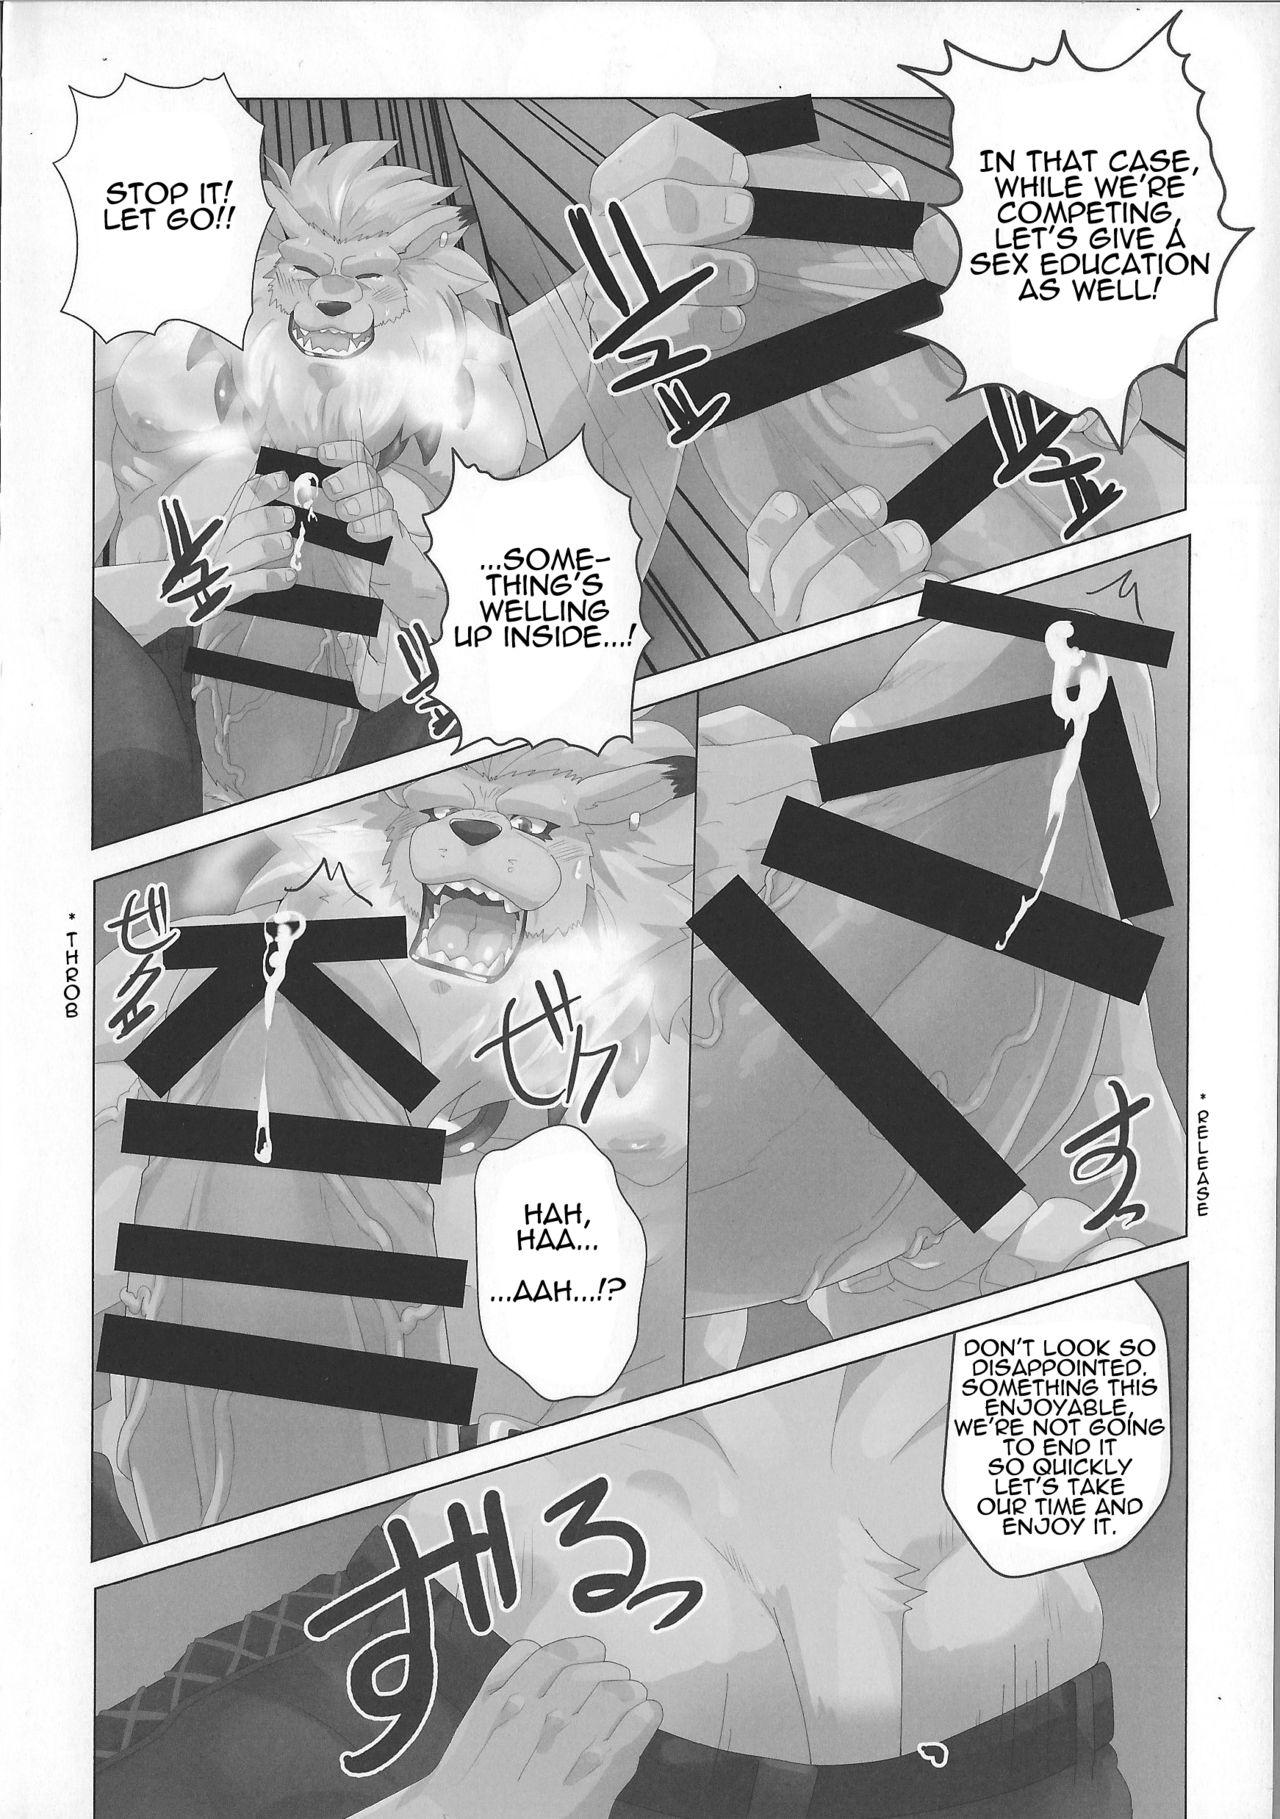 [Debirobu] For the Lion-Man Type Electric Life Form to Overturn Fate - Leomon Doujin [ENG] 14